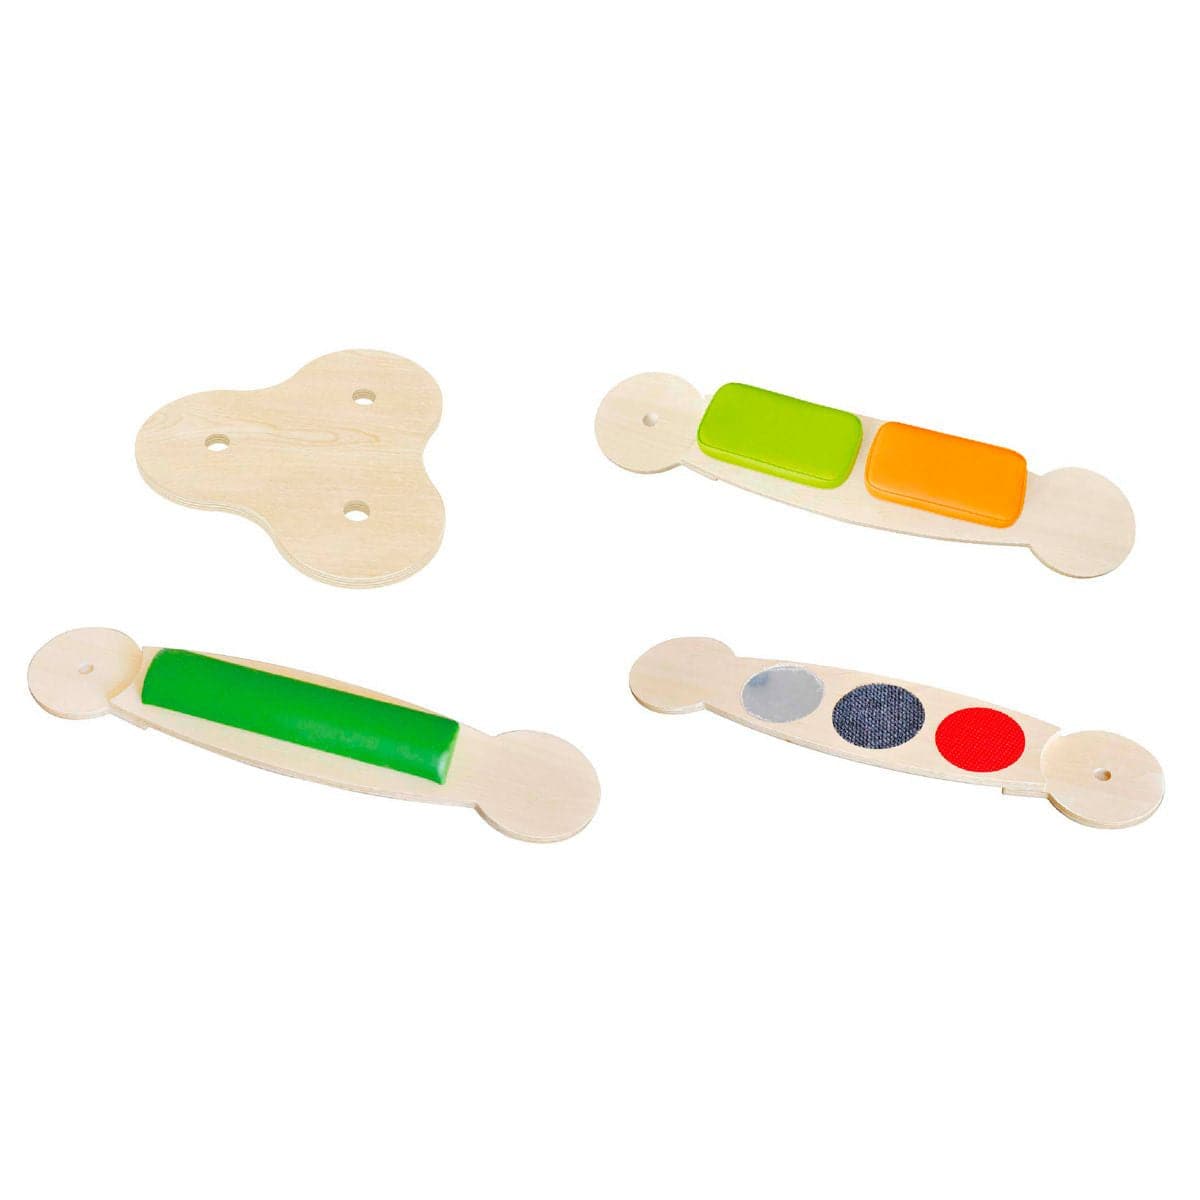 Balance Beams Set 1, The Wisdom Balance Beams Set 1 includes a 3-way linking island and 3 beams - cross balance board, tactile balance board and a bridge balance board. Each balance board measures 96 x 20cm, and the 3-way linking island measures 39 x 37cm. The Wisdom Balance Beams Set 1 is perfect for developing and stimulating balance, and collaborative play skills. These sensory balance beams are available in 3 different sets. There are no screws or assembly required – just click and go. The main body and